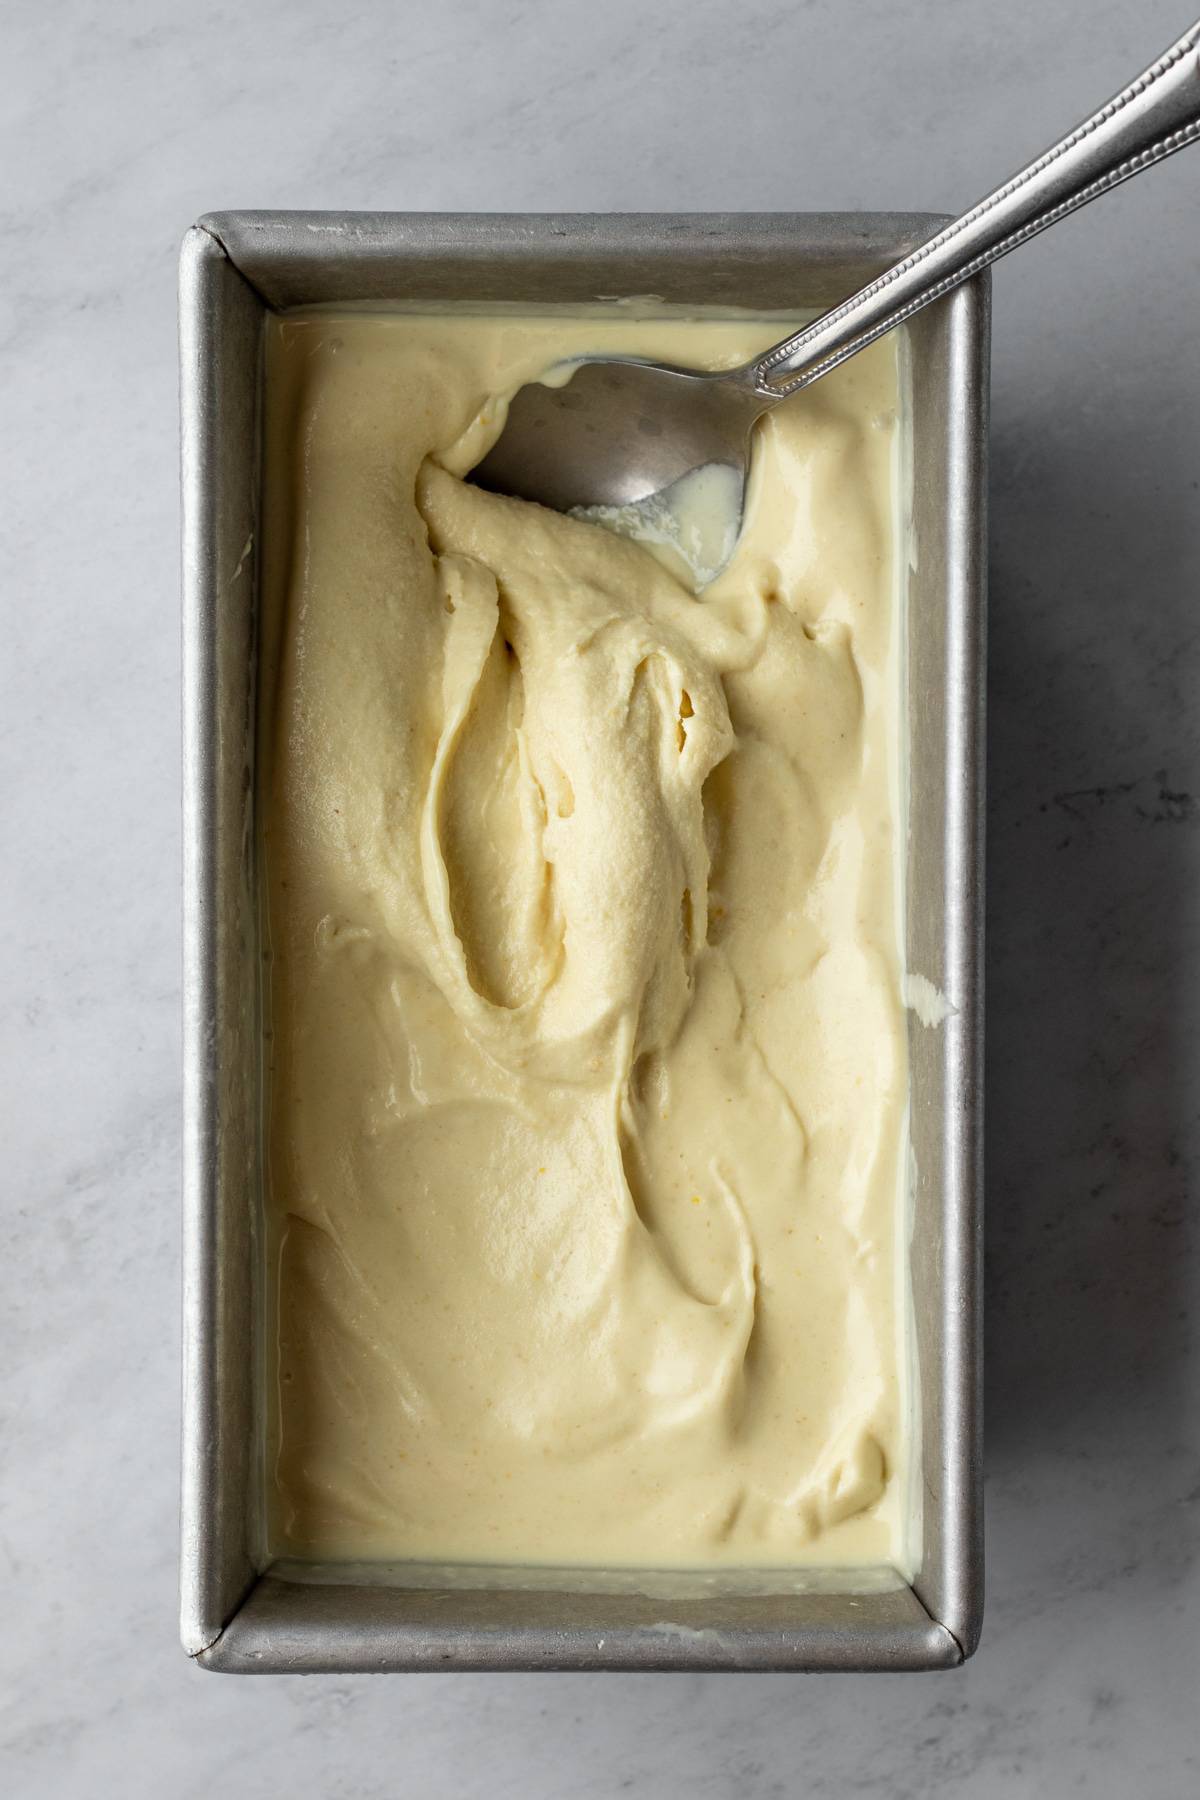 Just-churned vegan ice cream with a soft-serve consistency spread in a loaf pan.